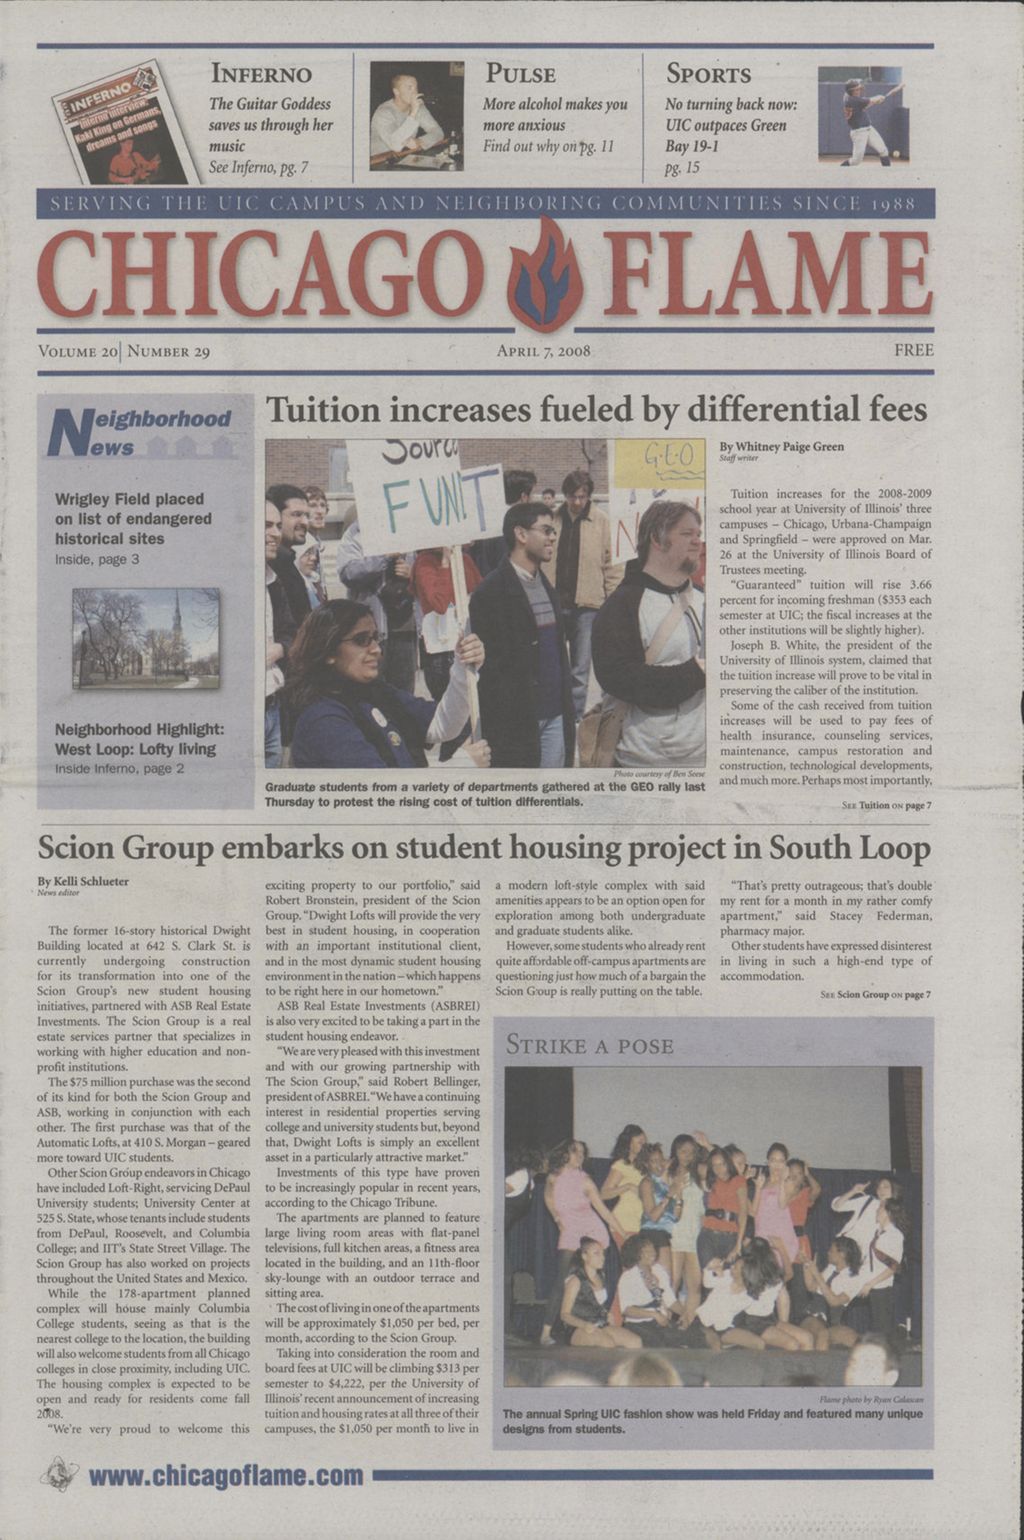 Chicago Flame (April 7, 2008)